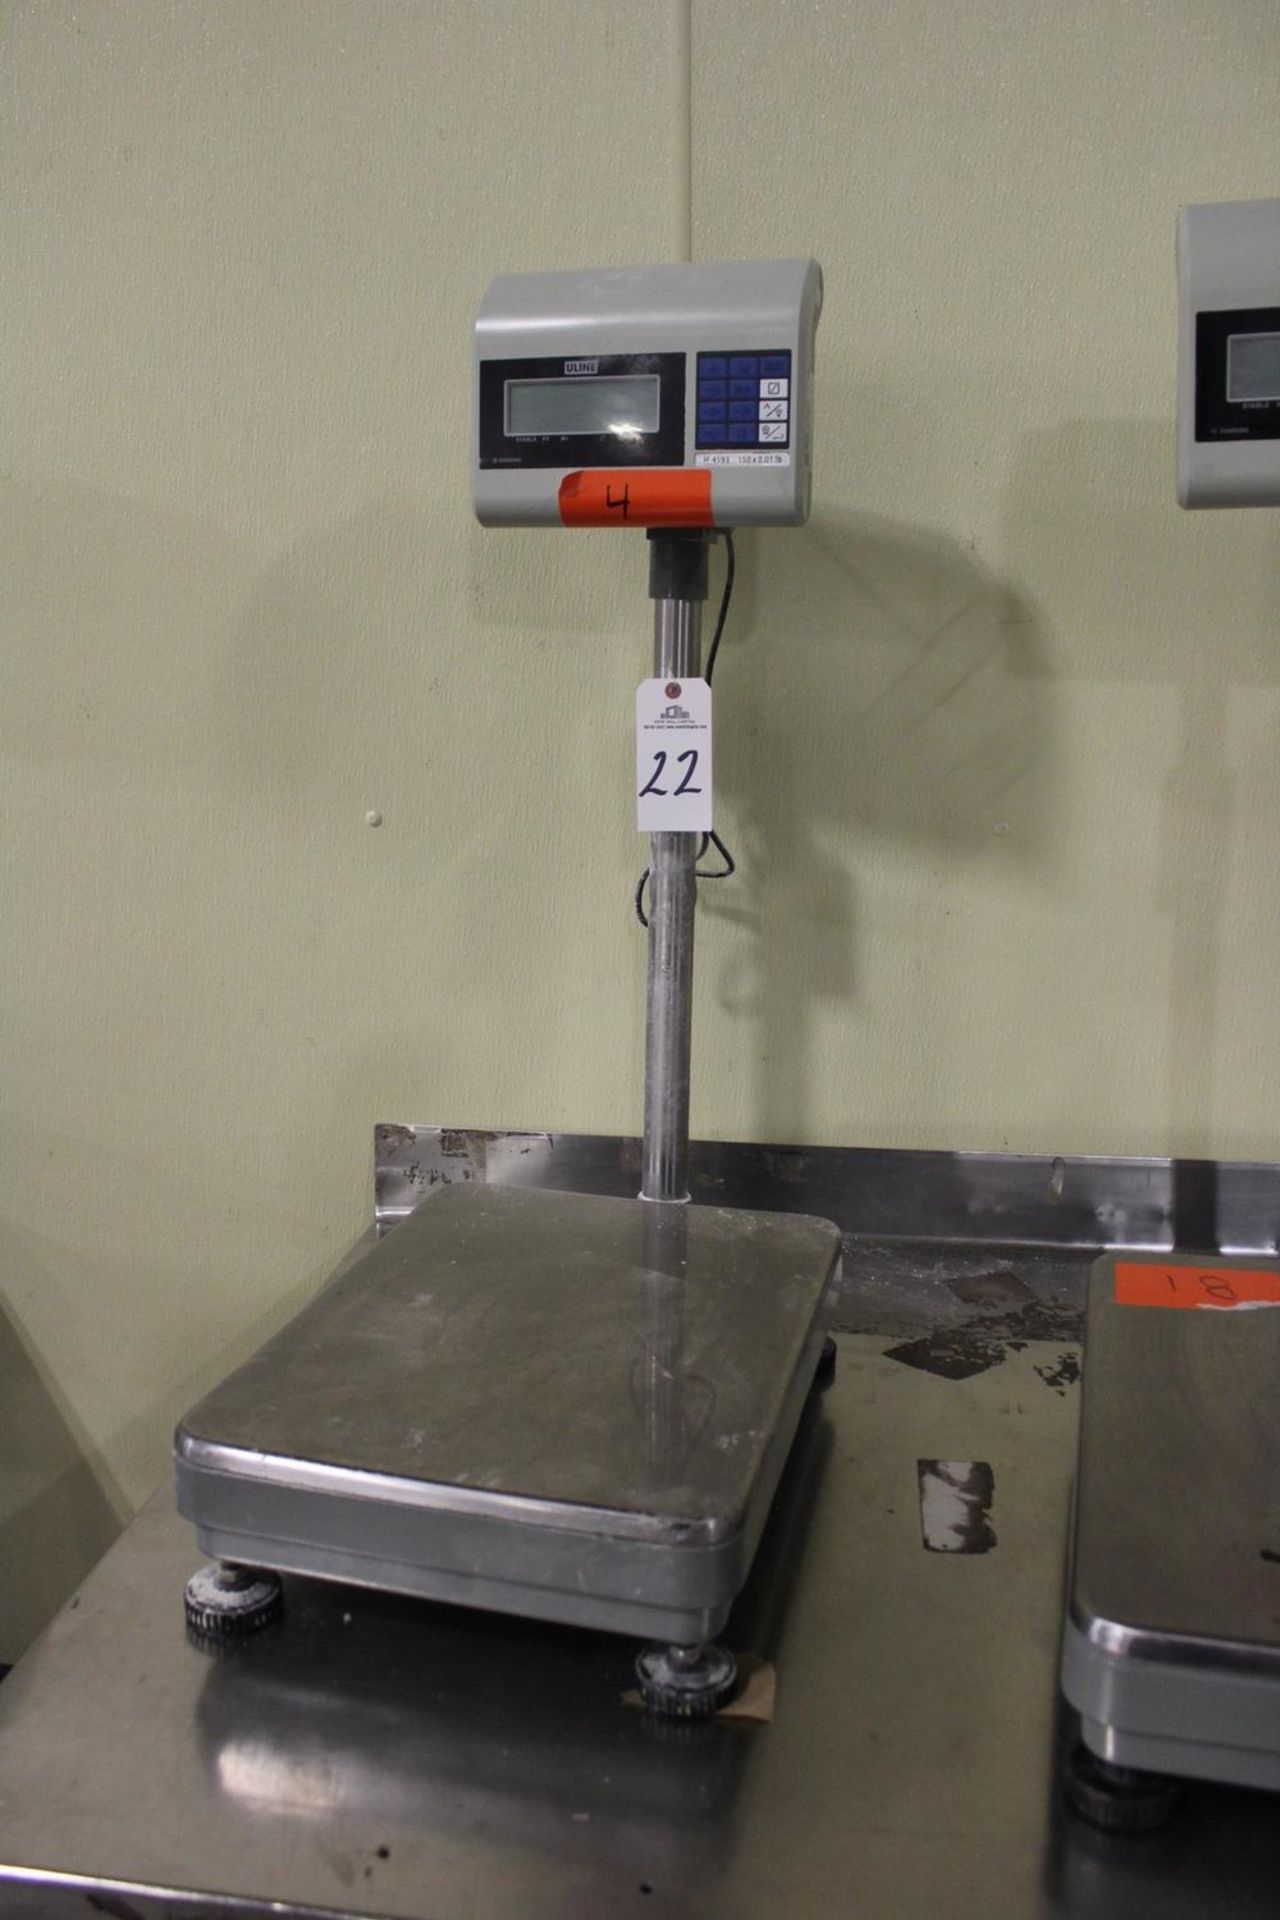 Uline Industrial Bench Scale | Rig Fee: $10